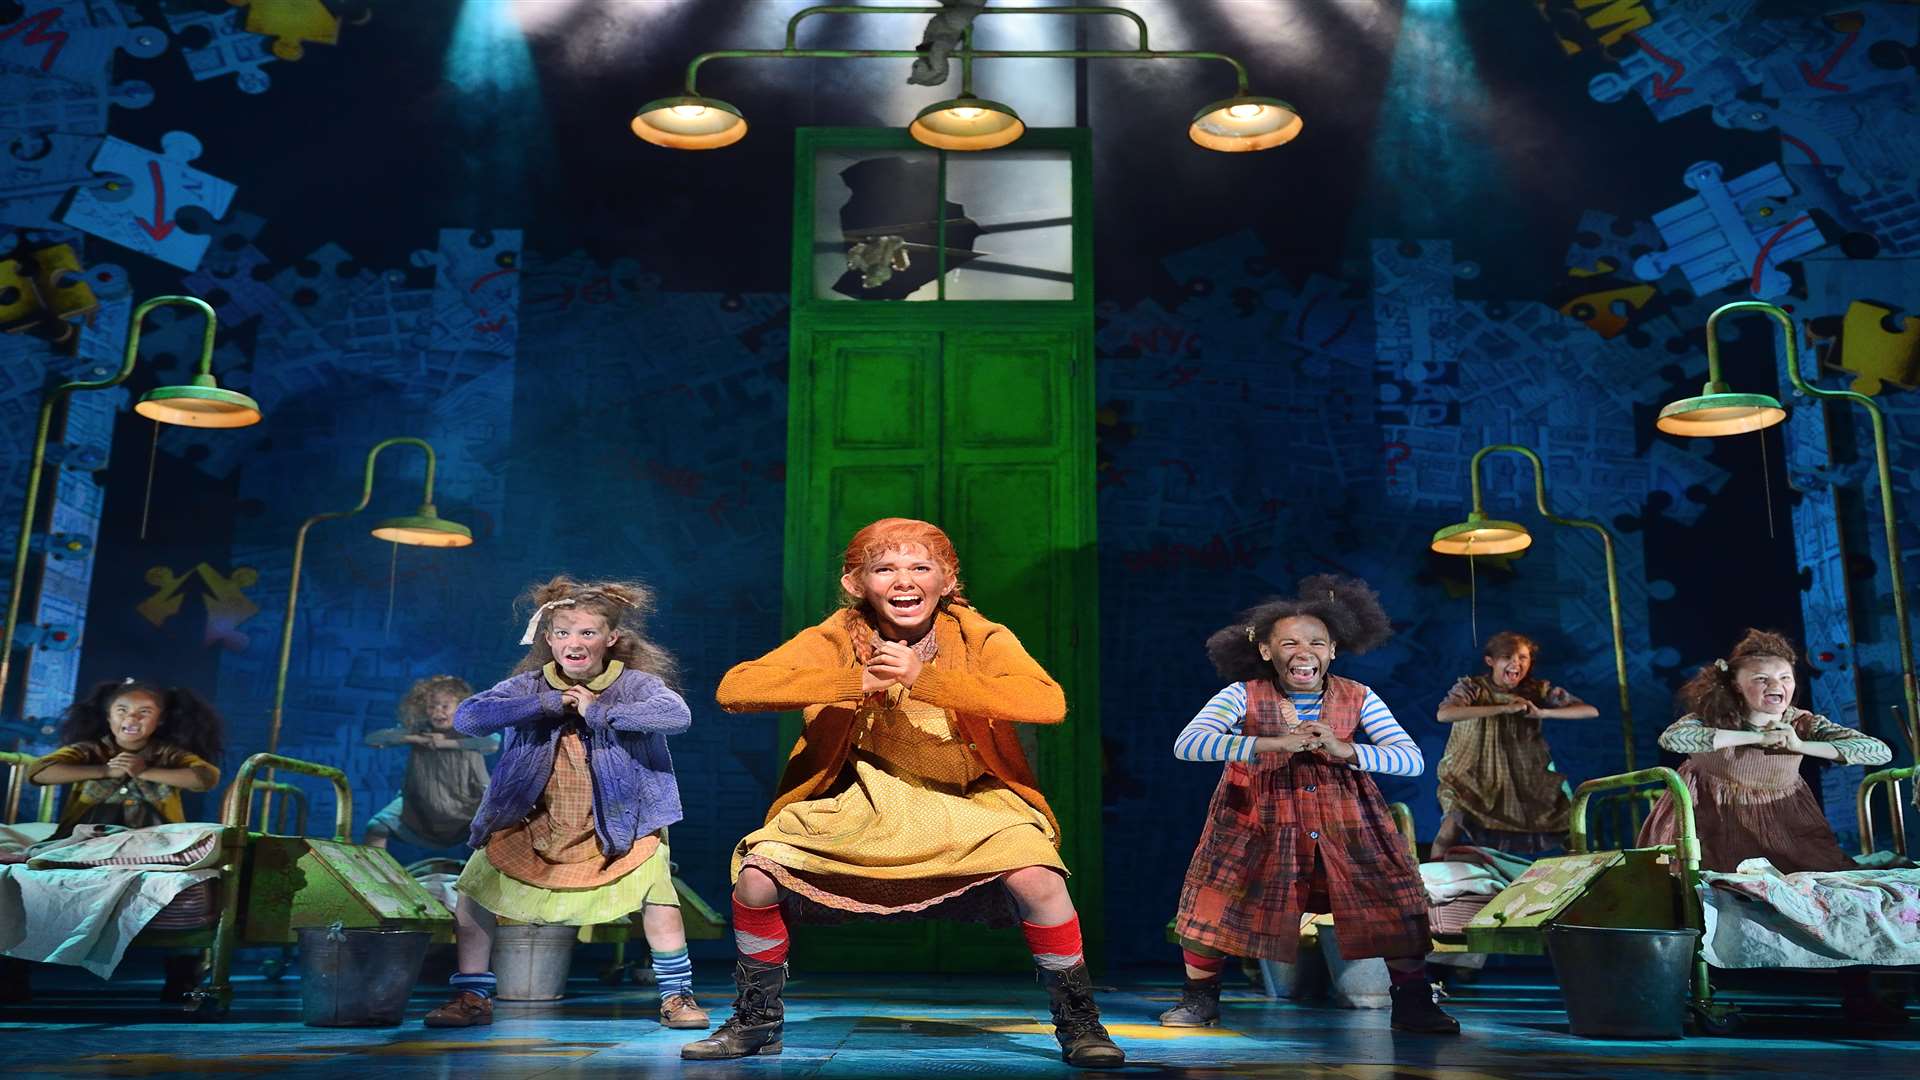 Left to right: Nicole Subebe (Molly), Maisie Thorn (Kate), Dora Yolland (Tessie), Ruby Stokes (Annie), Kathryn Whetter (Duffy), Charlotte Ross-Gower (Pepper) and Nancy Allsop (July)